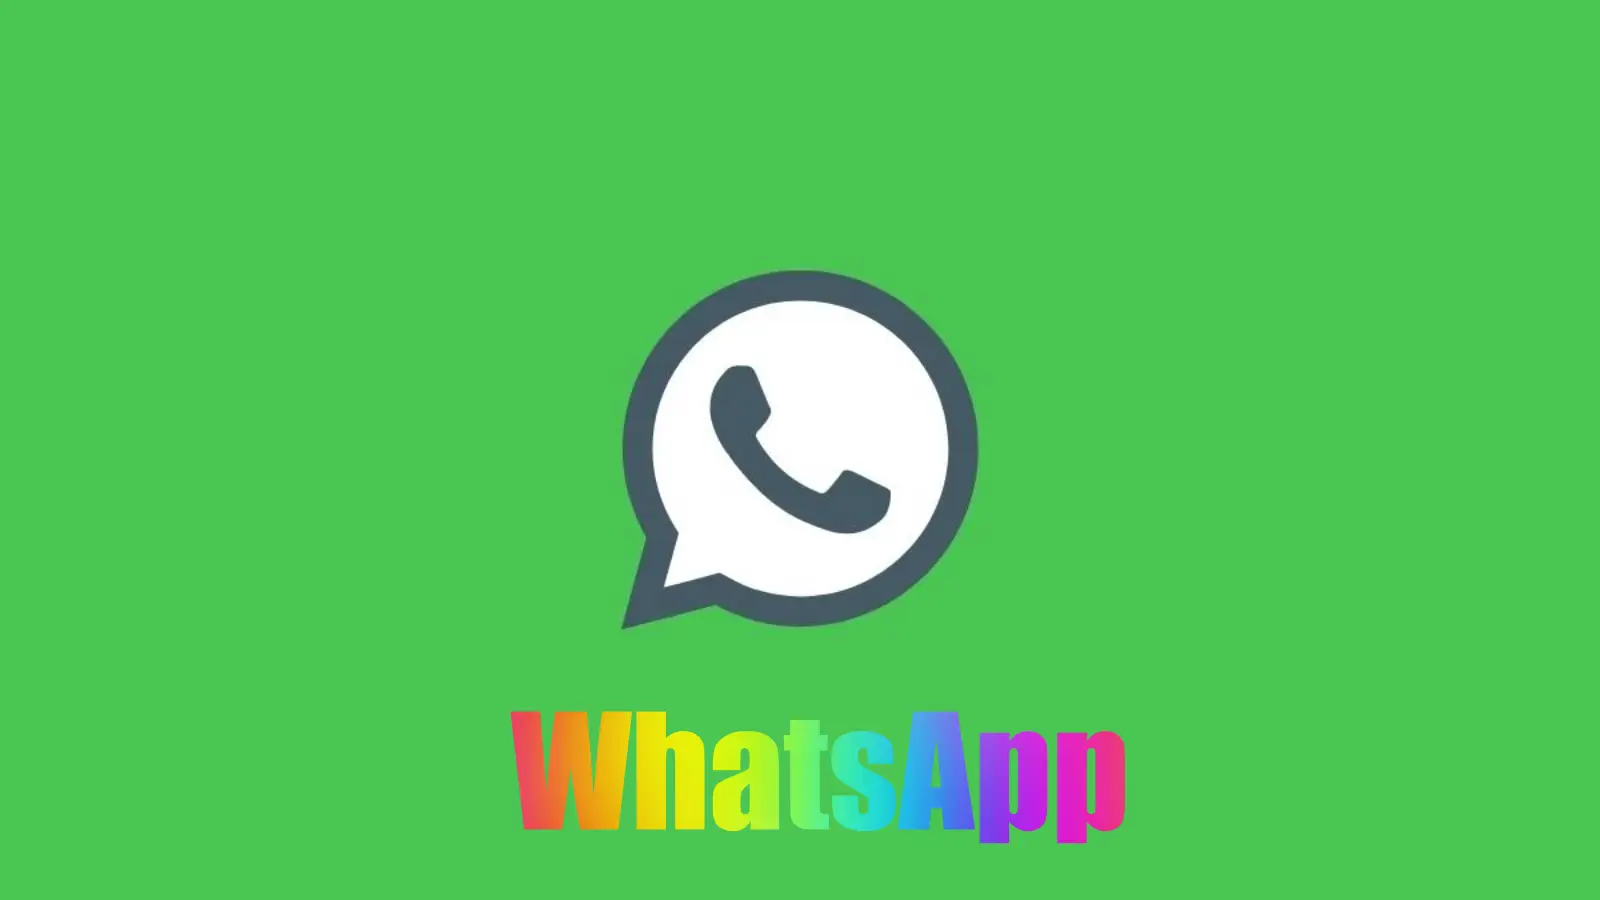 WhatsApp wants to launch a major function, even VISAM iPhone Android